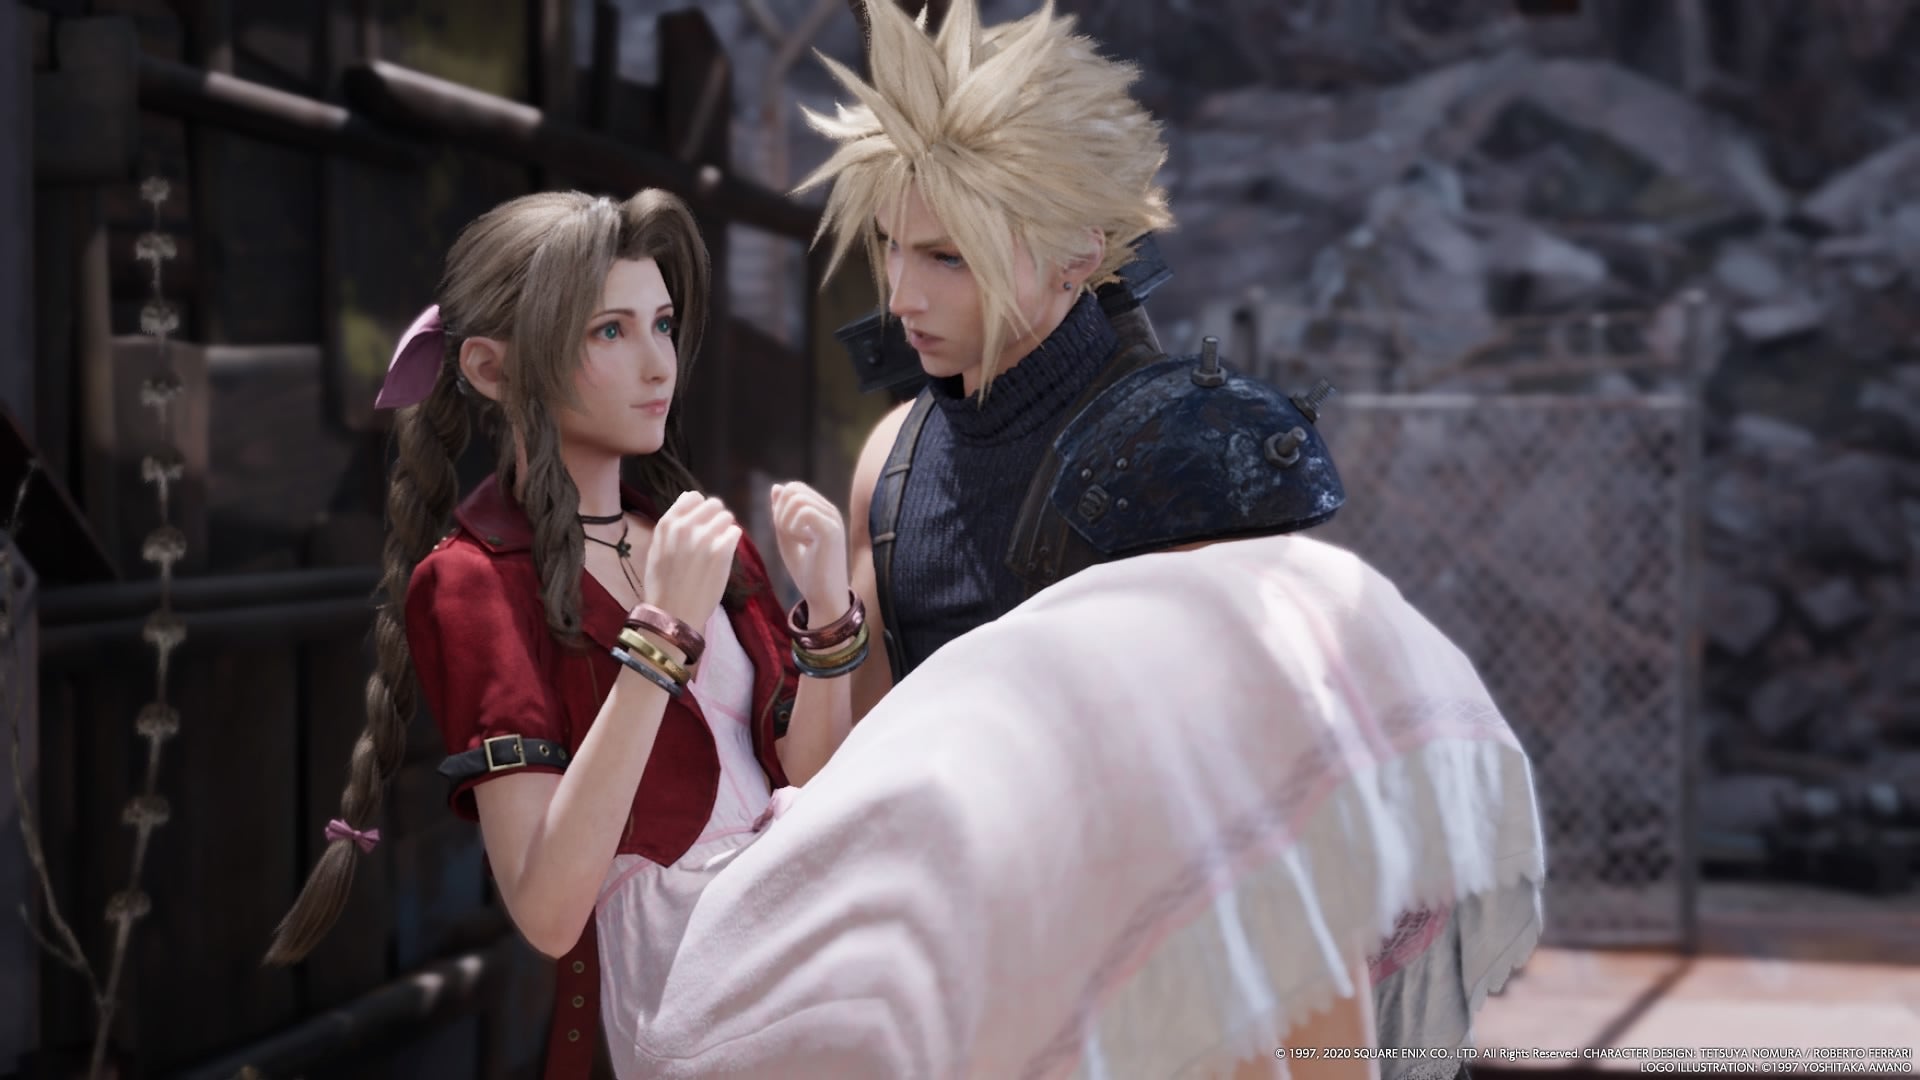 Final Fantasy 7 Remake Part 2 is now in full development according to a  recent interview